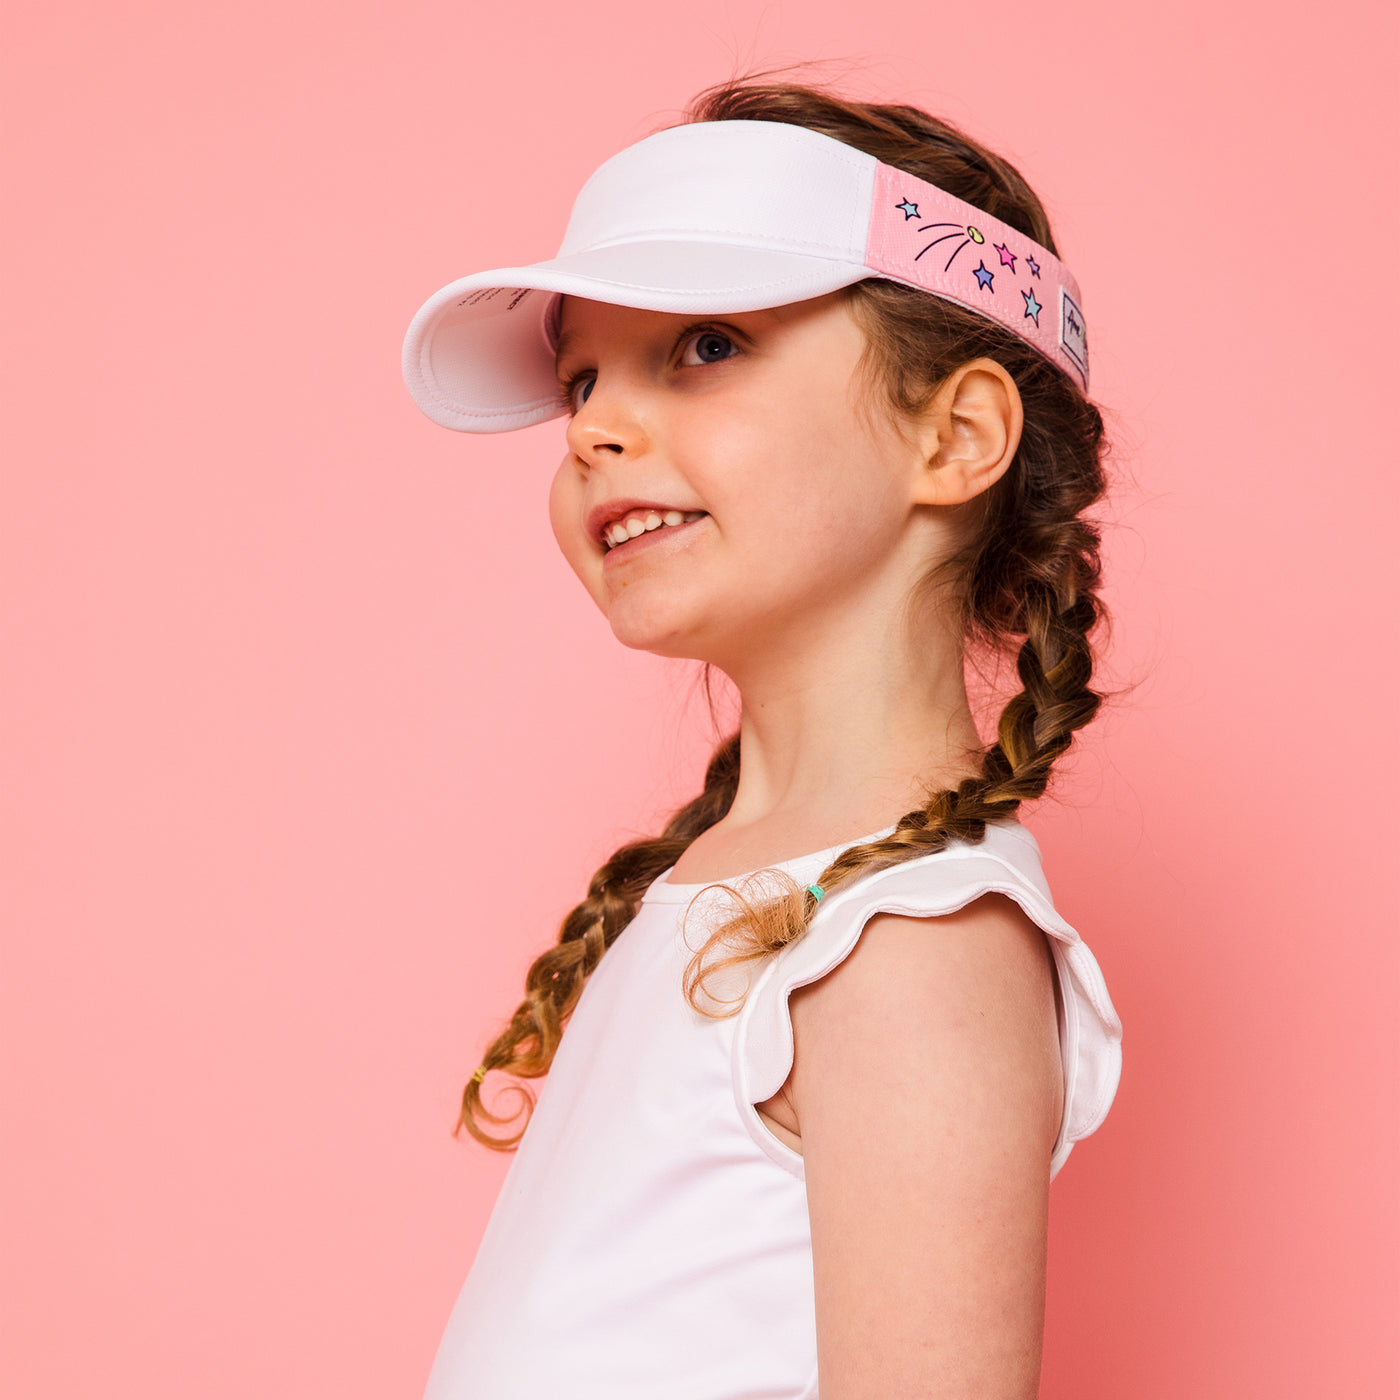 Little girl on pink background wearing light pink kids visor with shooting stars and tennis balls printed on the sides.